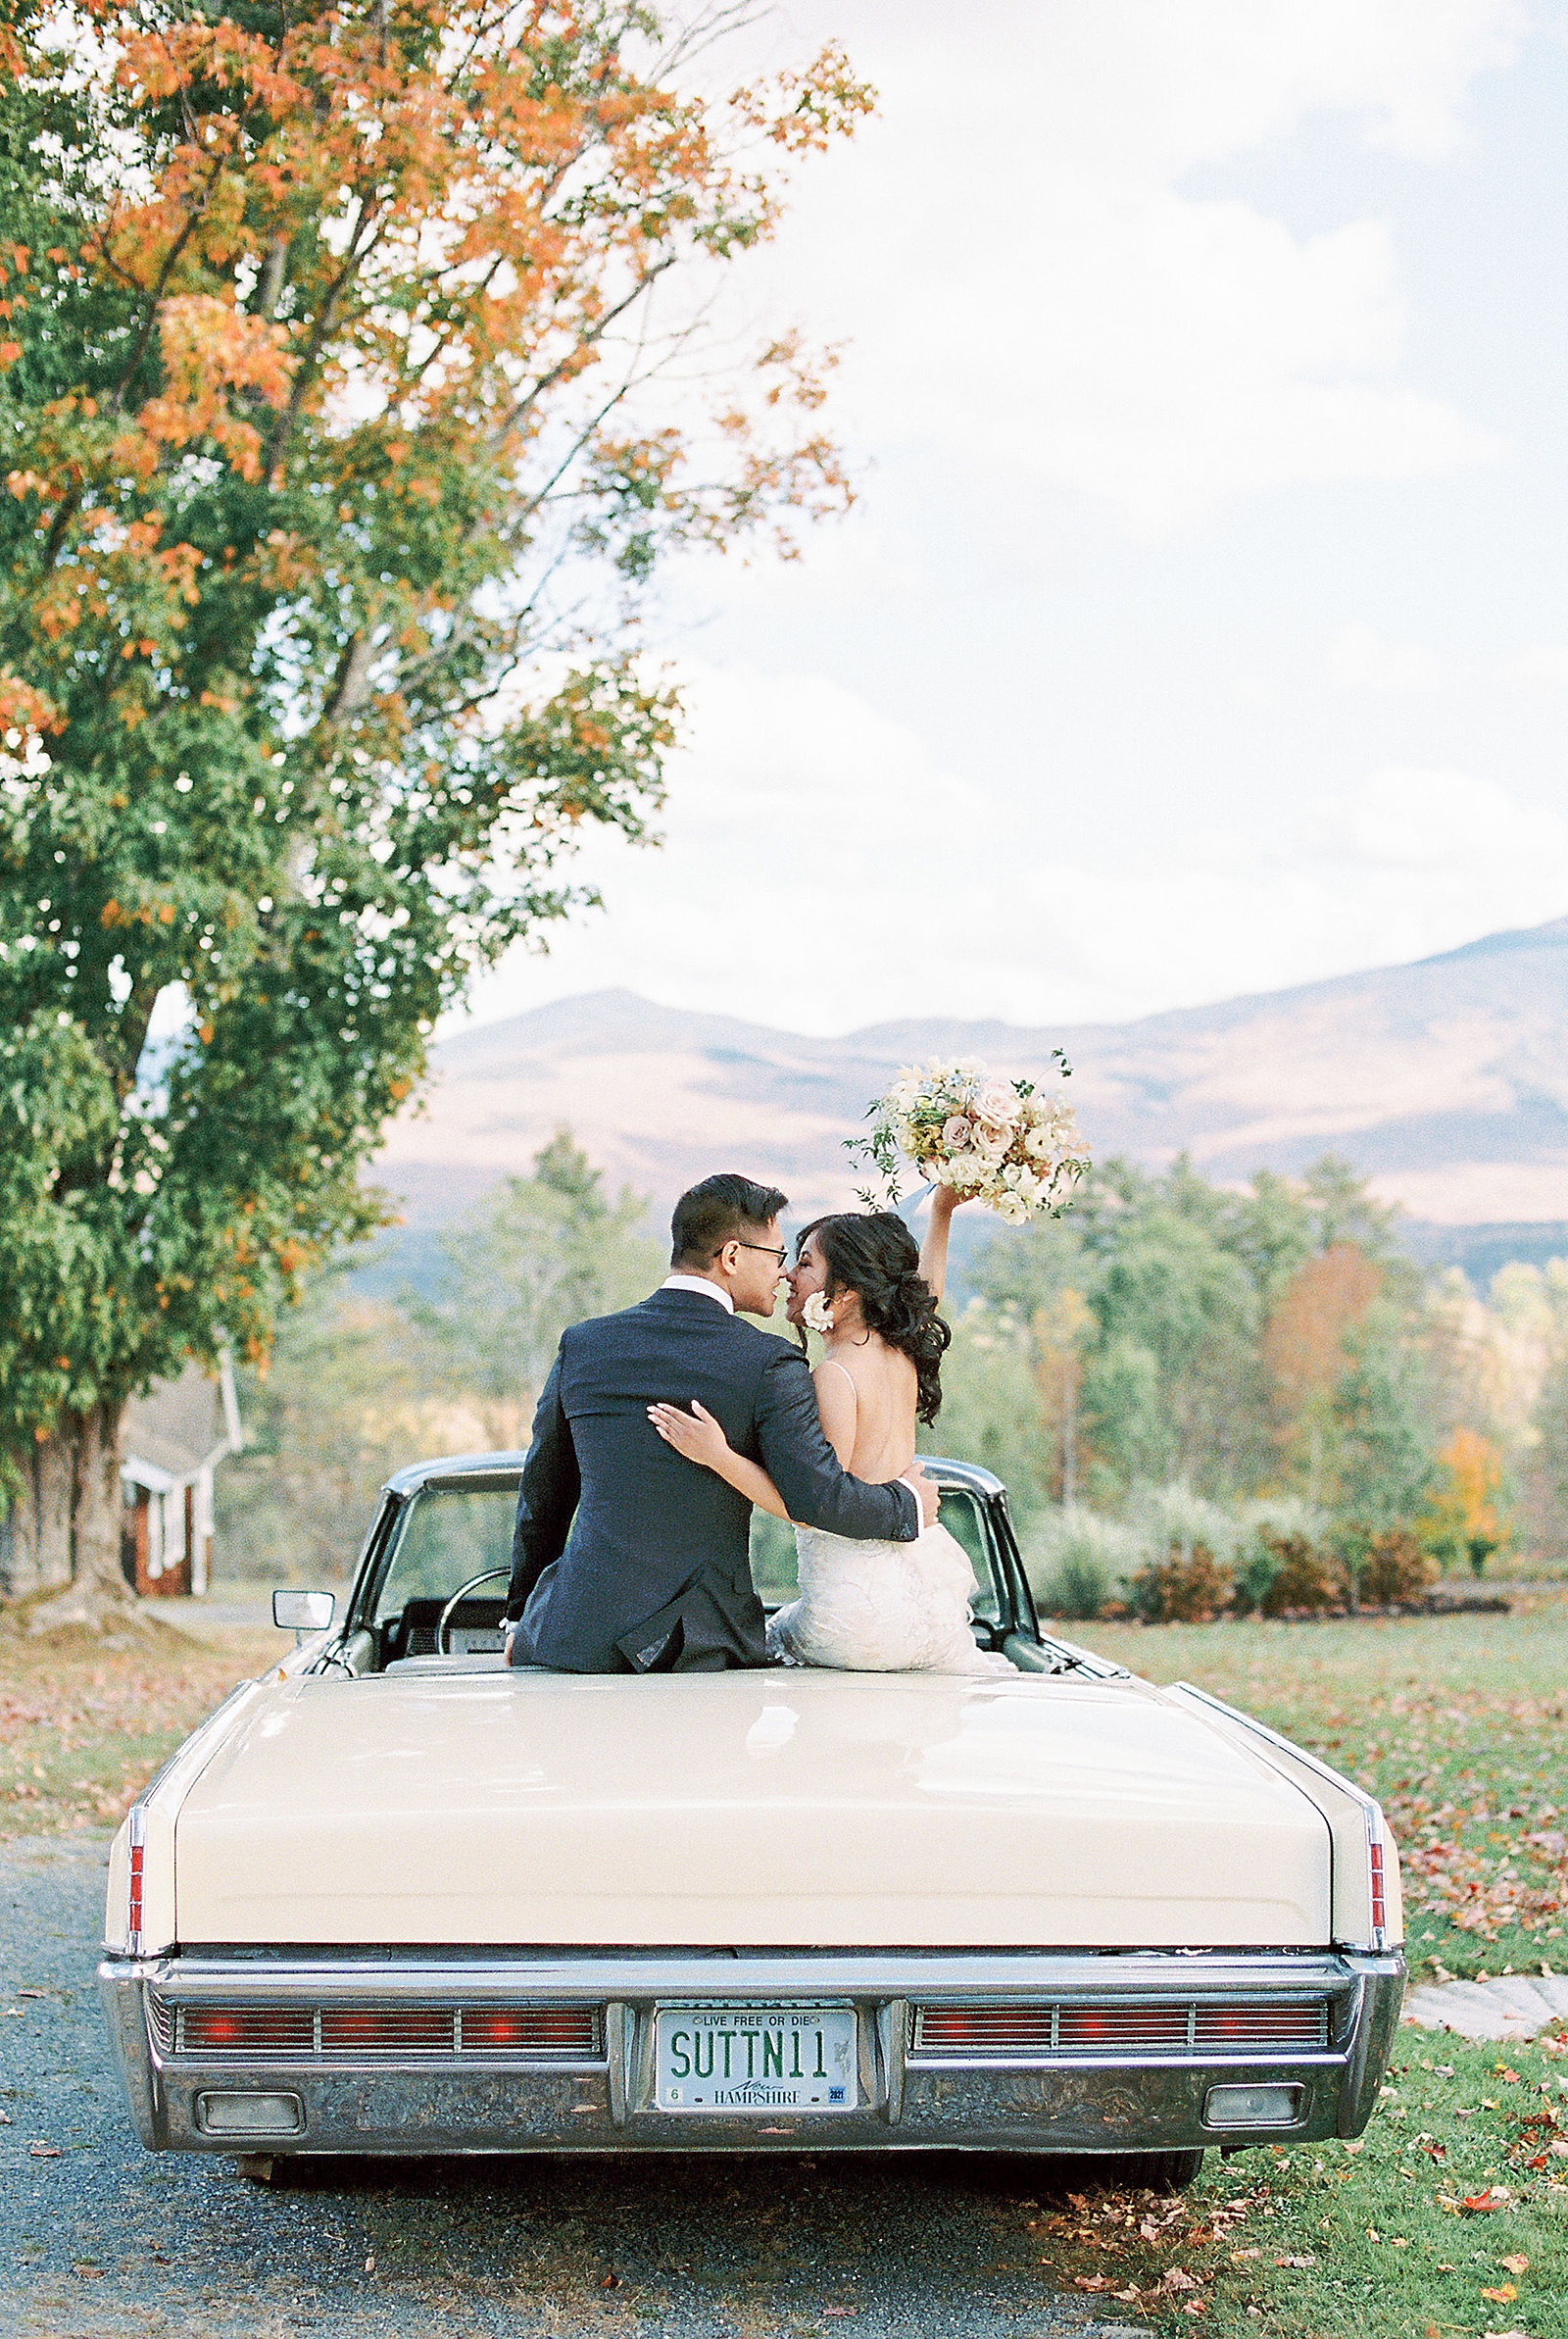 Wedding couple on a car by photographer who talks about The Impact of Client Experience on Your Marketing